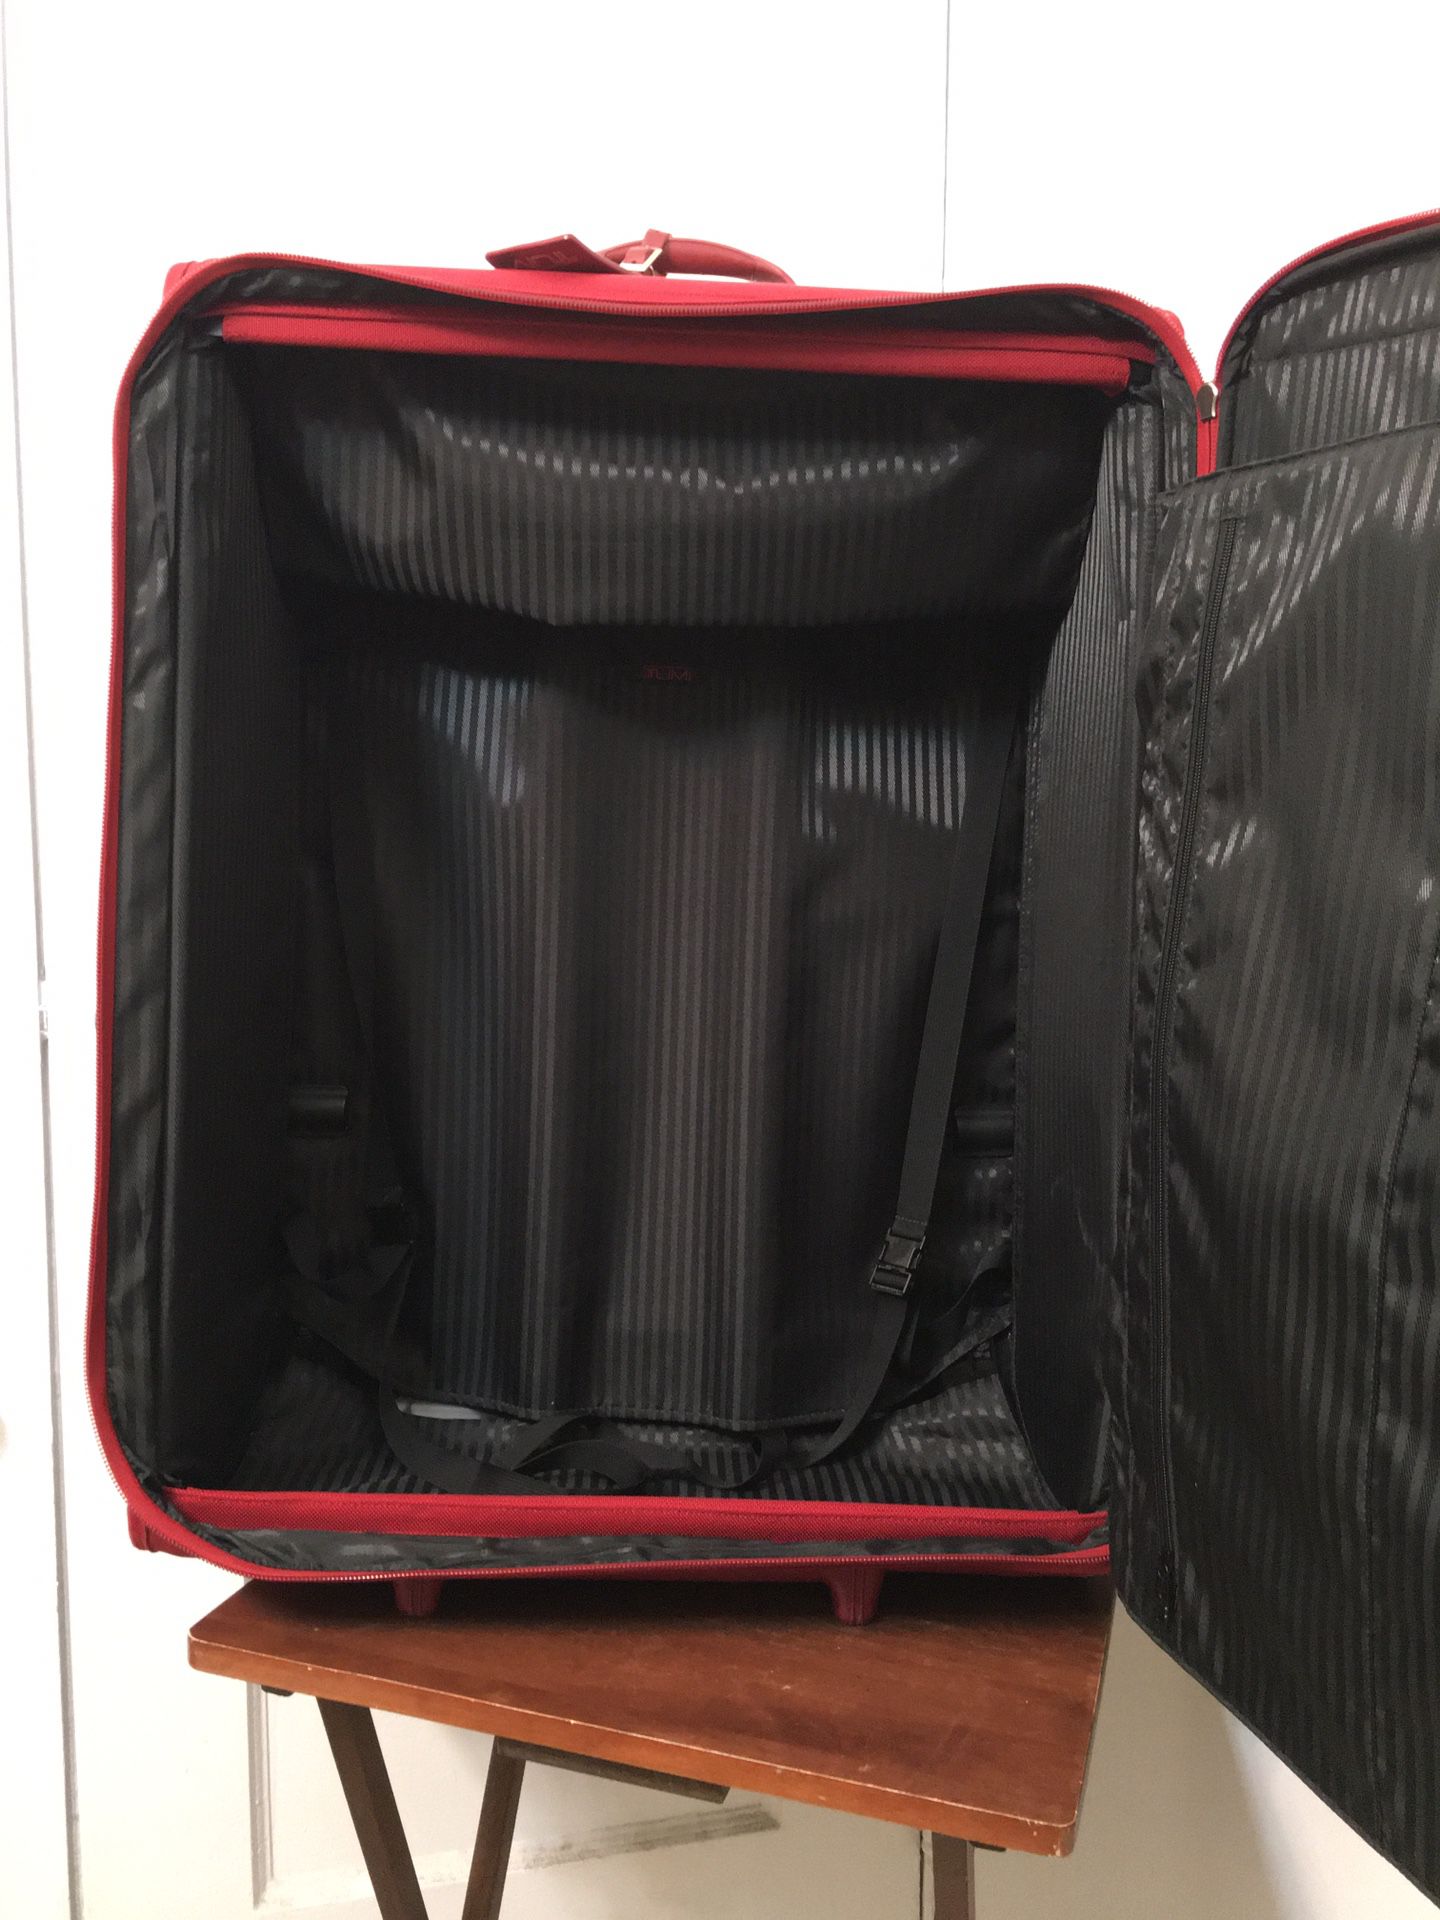 Tumi Luggage And  Garment bag Attached Dimension 12x22x29